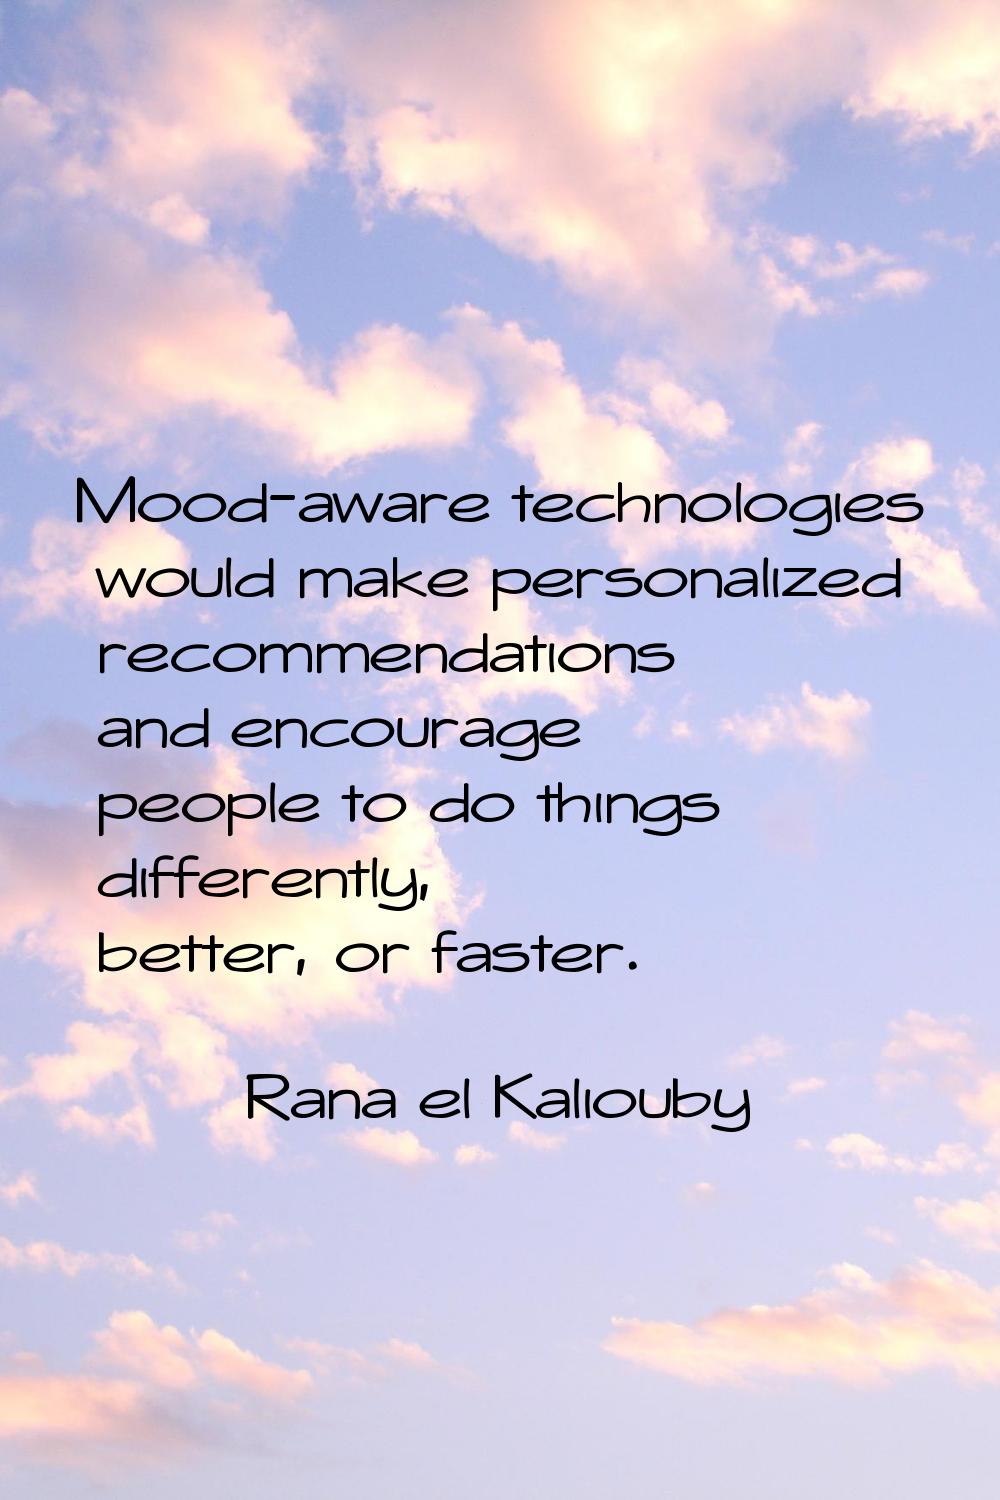 Mood-aware technologies would make personalized recommendations and encourage people to do things d